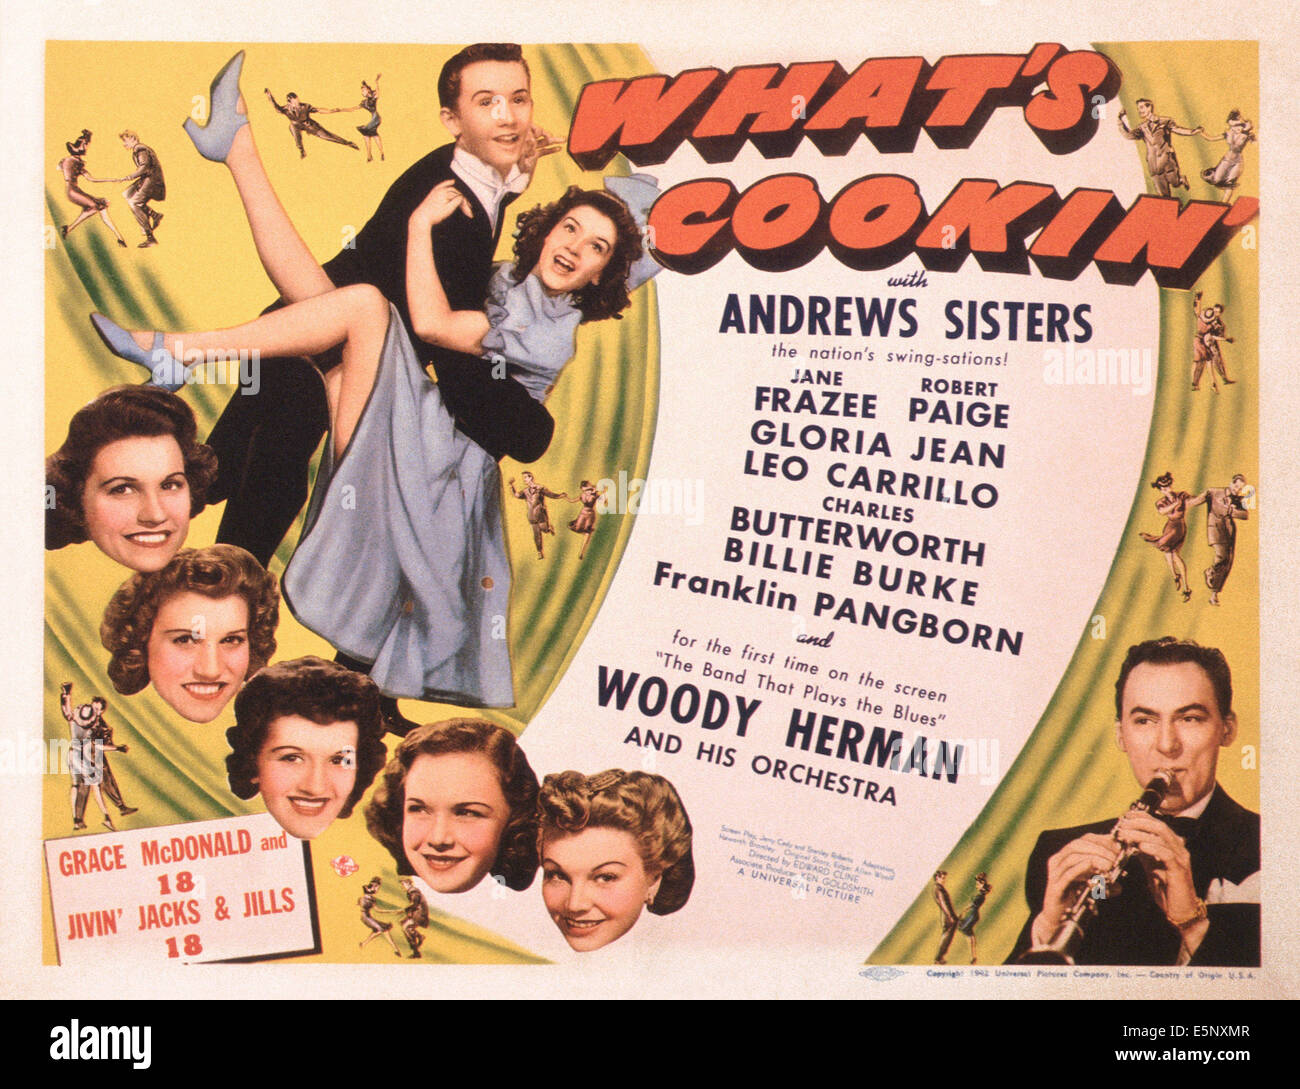 WHAT'S COOKIN'?, US lobbycard, from bottom left: Maxene Andrews, Patty Andews, Laverne Andrews, (aka the Andrews Sisters), Stock Photo